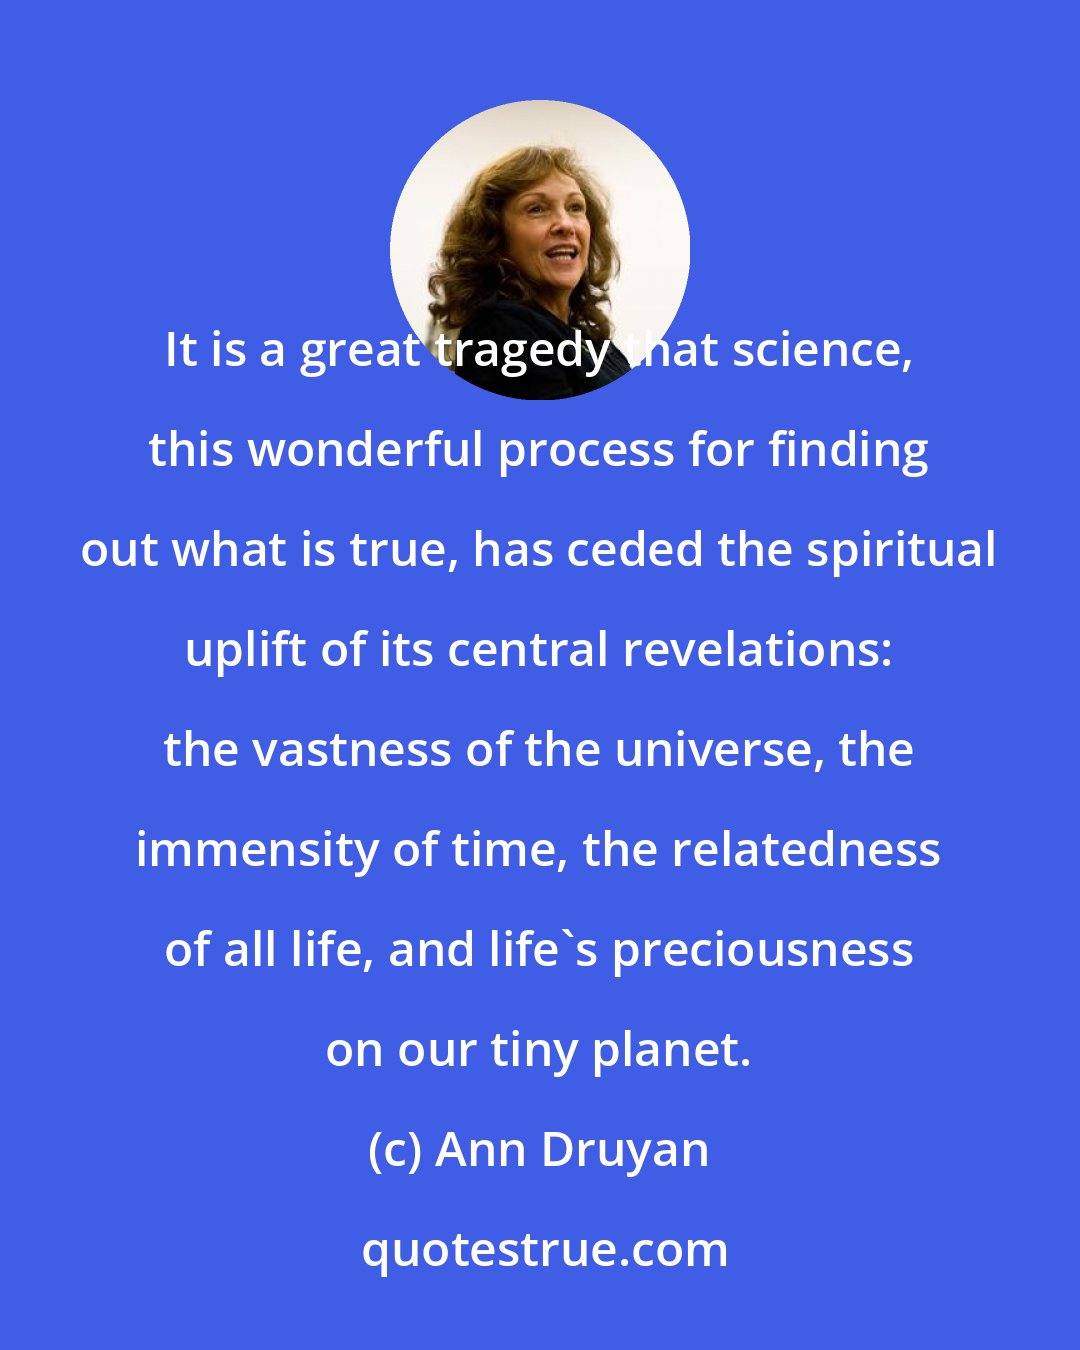 Ann Druyan: It is a great tragedy that science, this wonderful process for finding out what is true, has ceded the spiritual uplift of its central revelations: the vastness of the universe, the immensity of time, the relatedness of all life, and life's preciousness on our tiny planet.